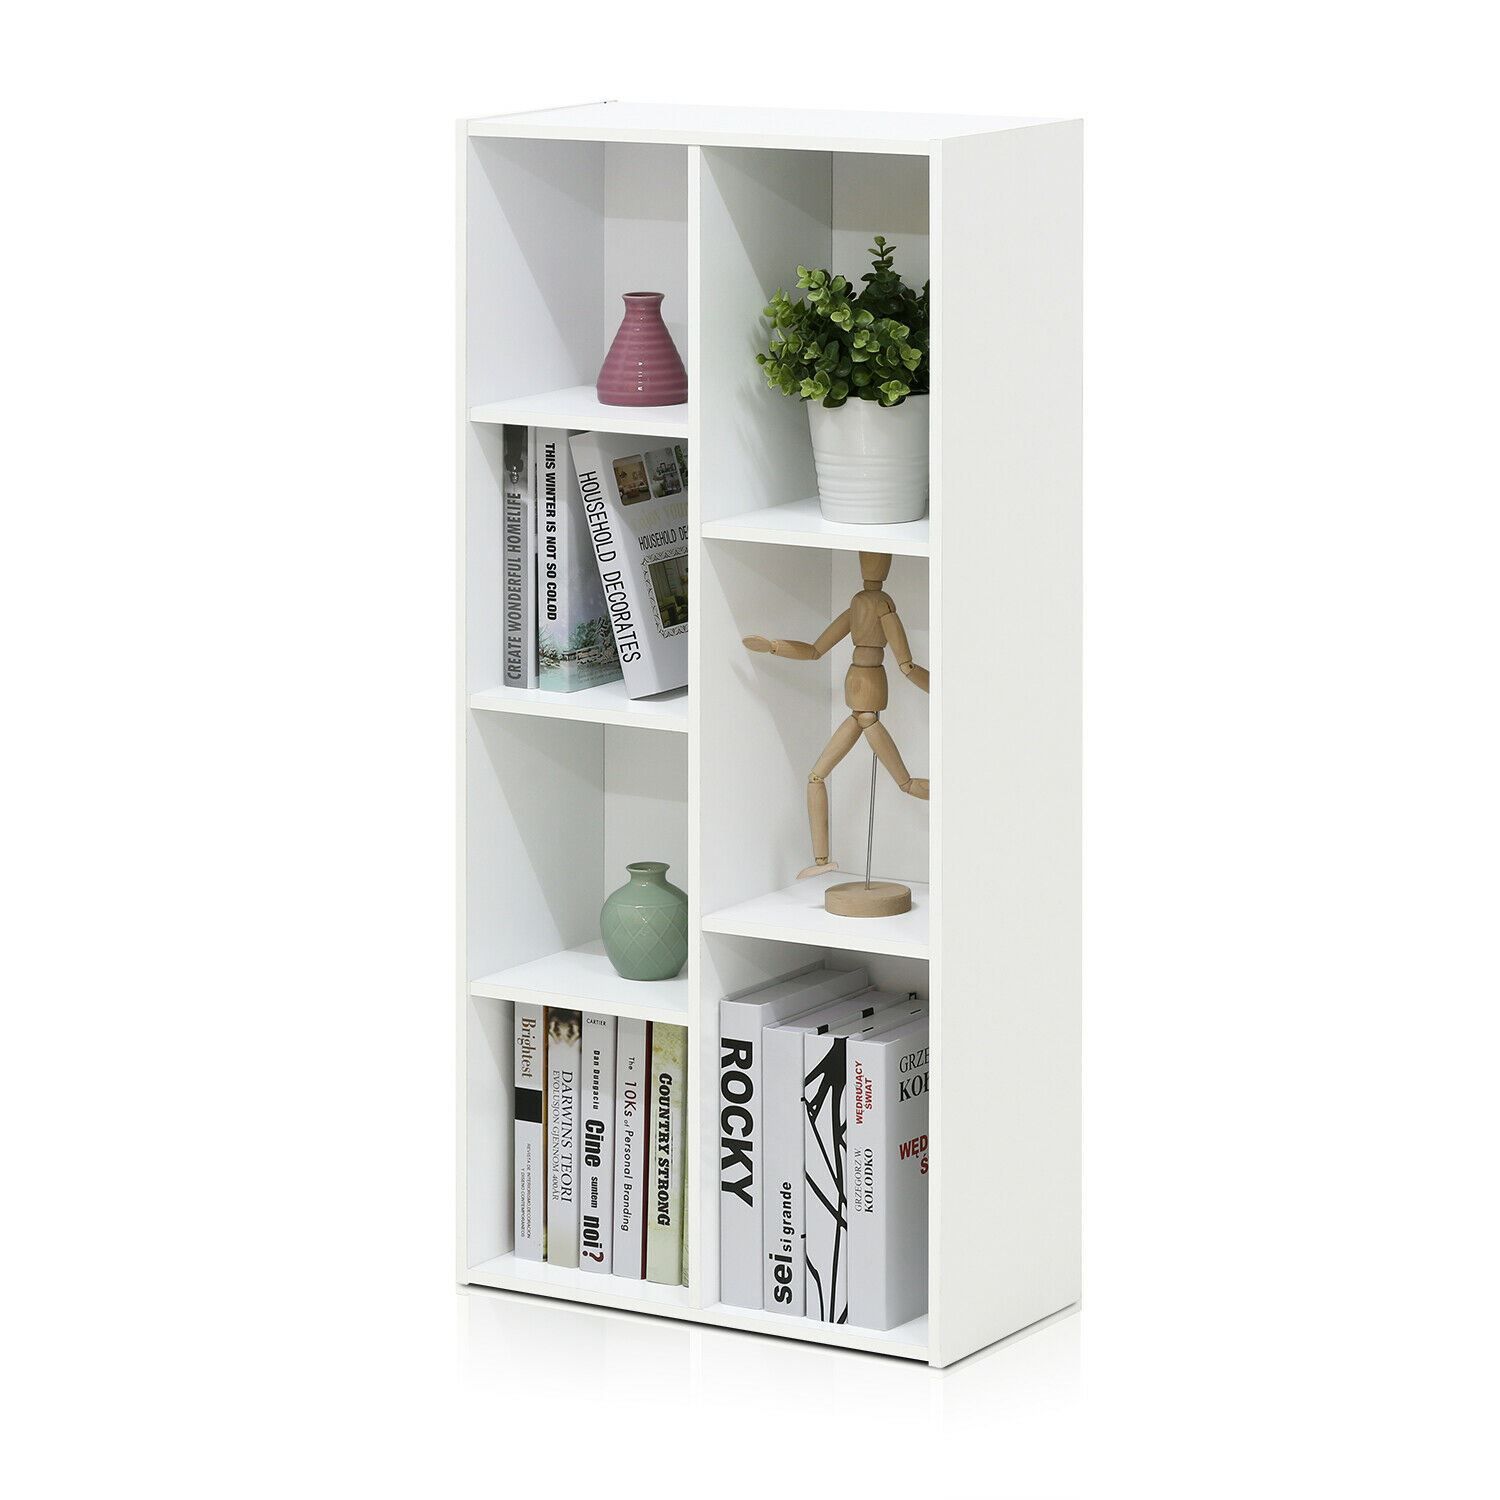 - Furinno cube open shelf features simplicity and easy blend in with any home decor.
- It offers multiple colors to create your own storage space and also enhances your home. 
- This series is made of CARB particle board and manufactured in Malaysia. 
- There is no foul smell, durable and the material is stable.
- Care instructions: wipe clean with clean damped cloth. Avoid using harsh chemicals.